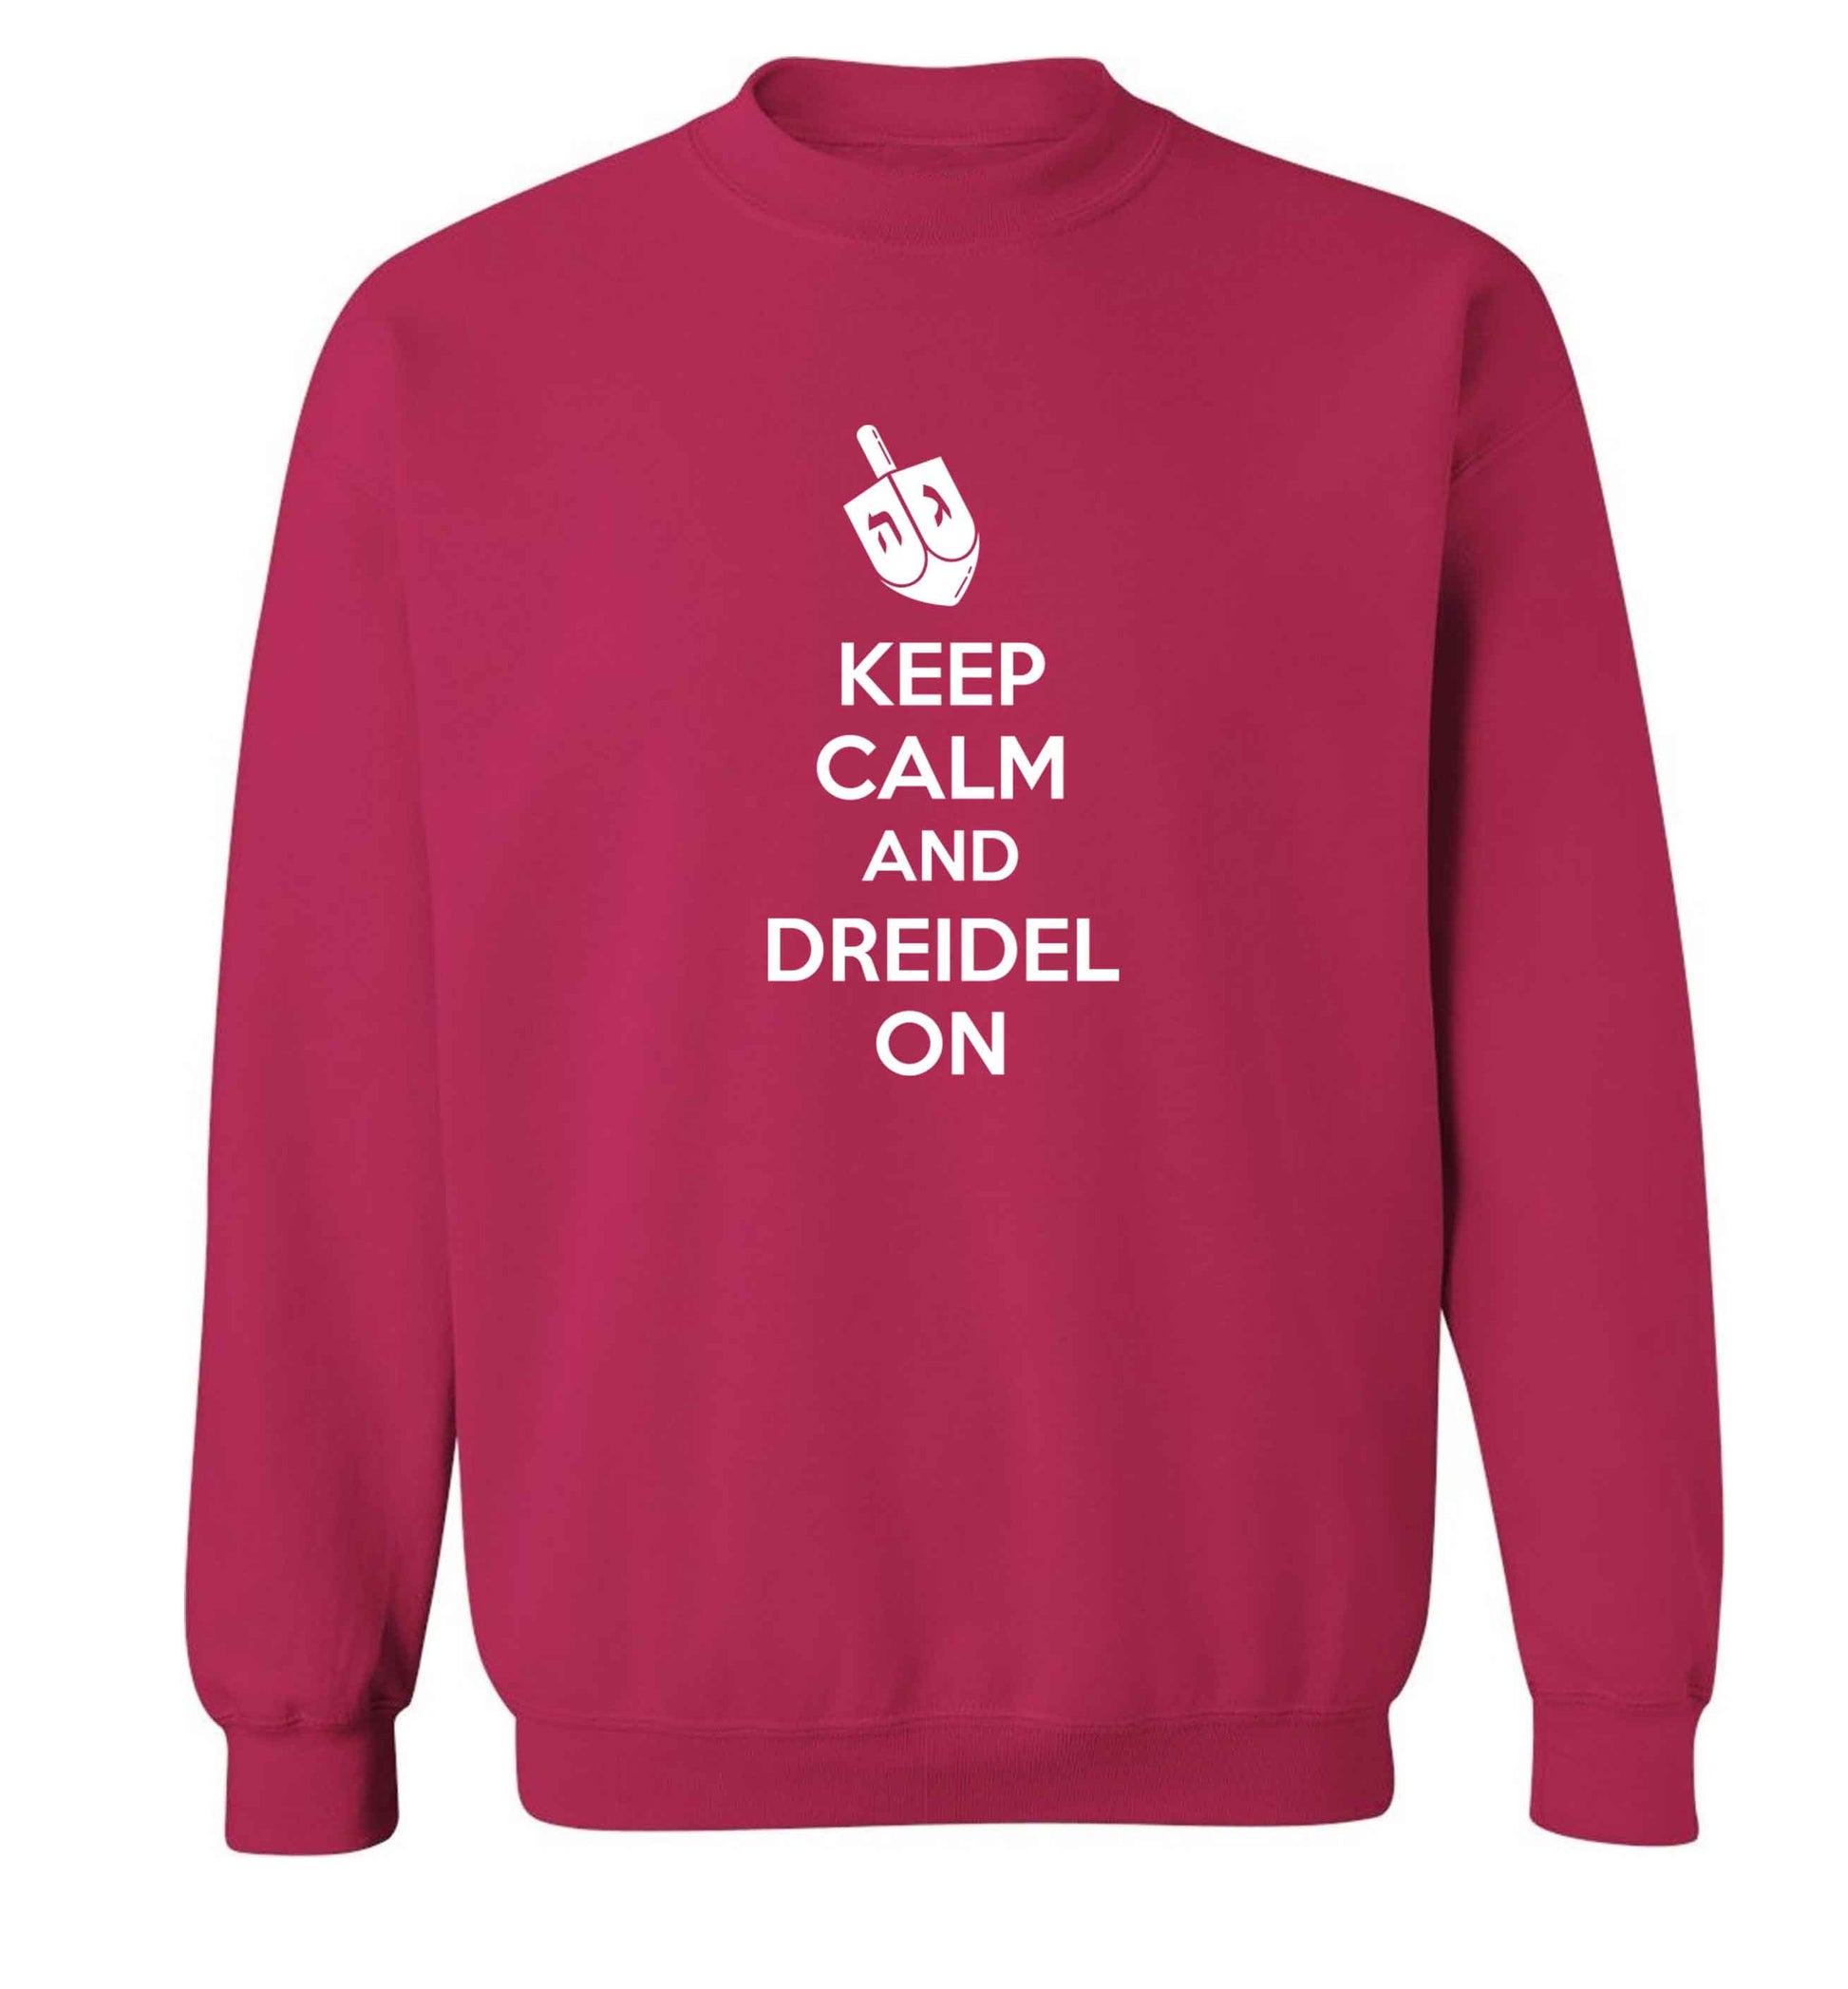 Keep calm and dreidel on adult's unisex pink sweater 2XL